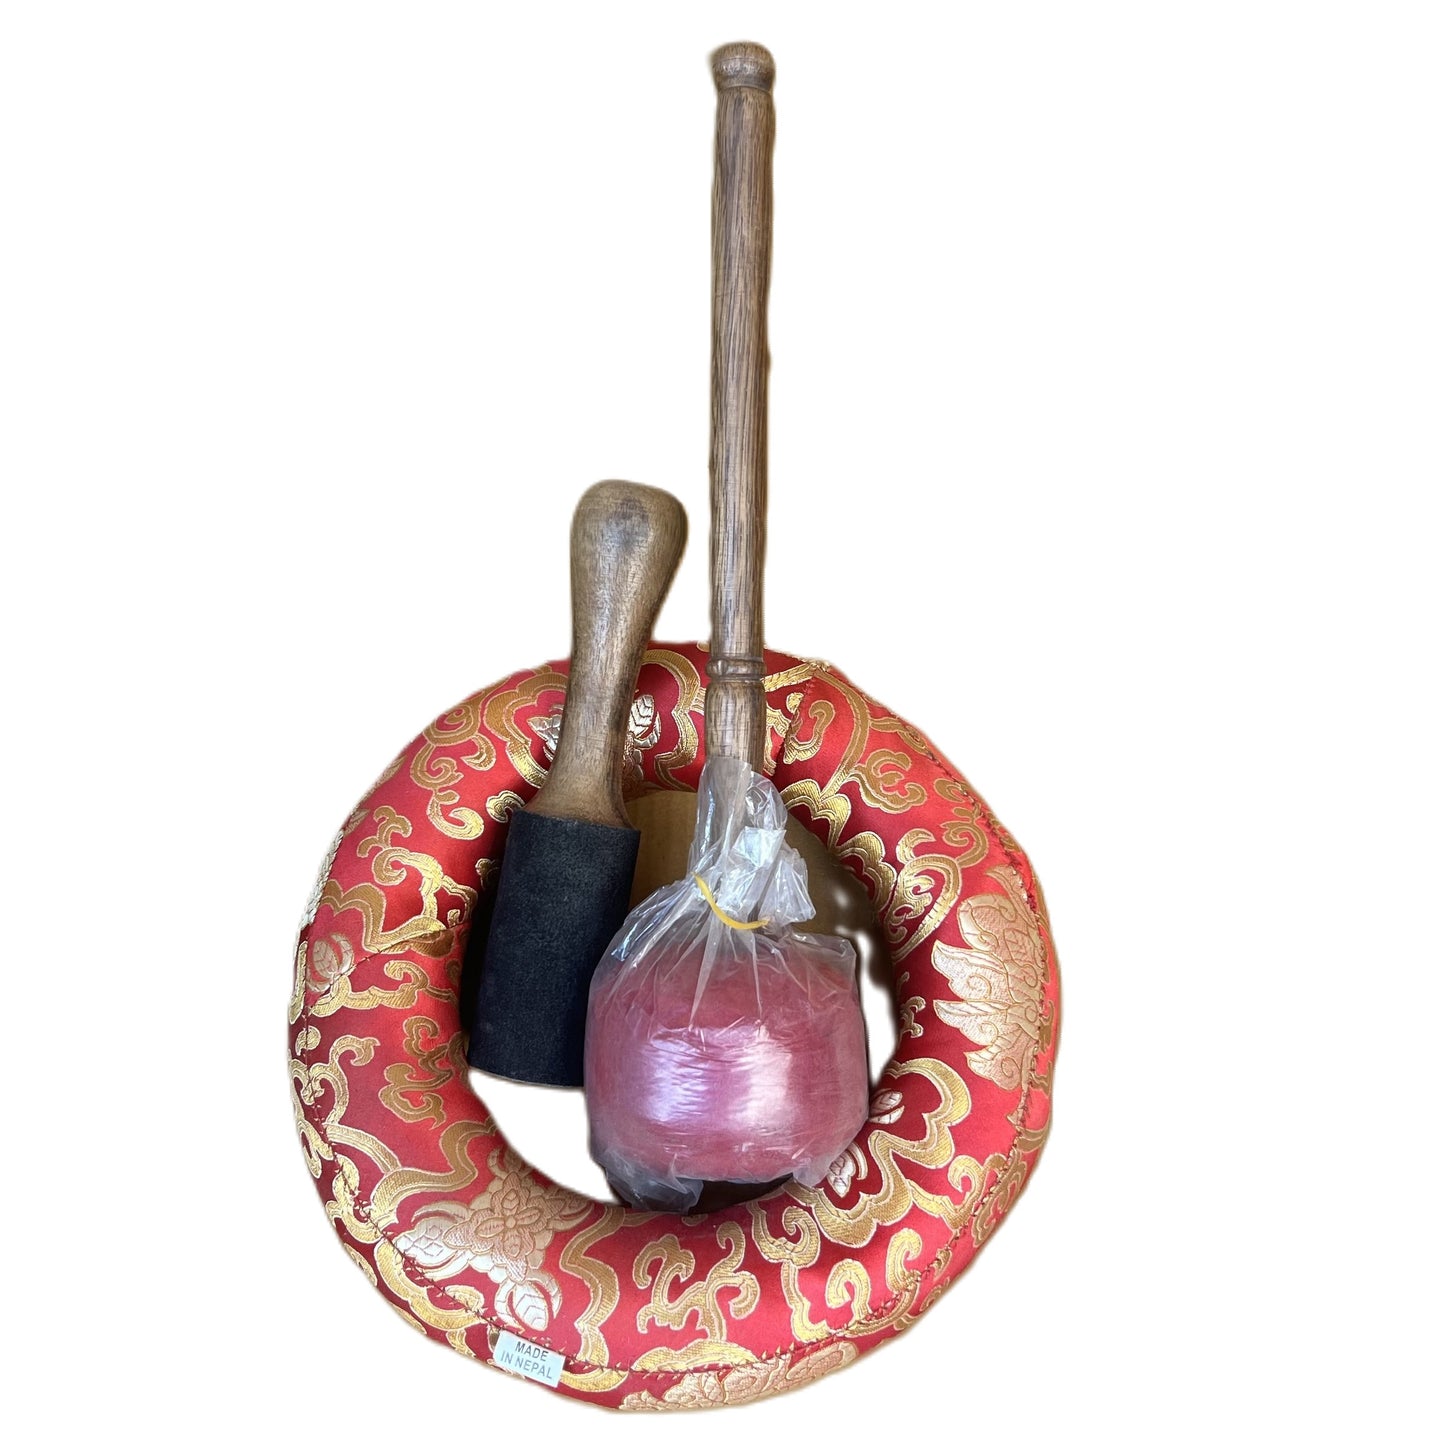 HAND-HAMMERED/ HANDMADE LARGE TIBETAN SINGING BOWL FROM NEPAL SUPPLIED WITH FREE CUSHION AND MALLET